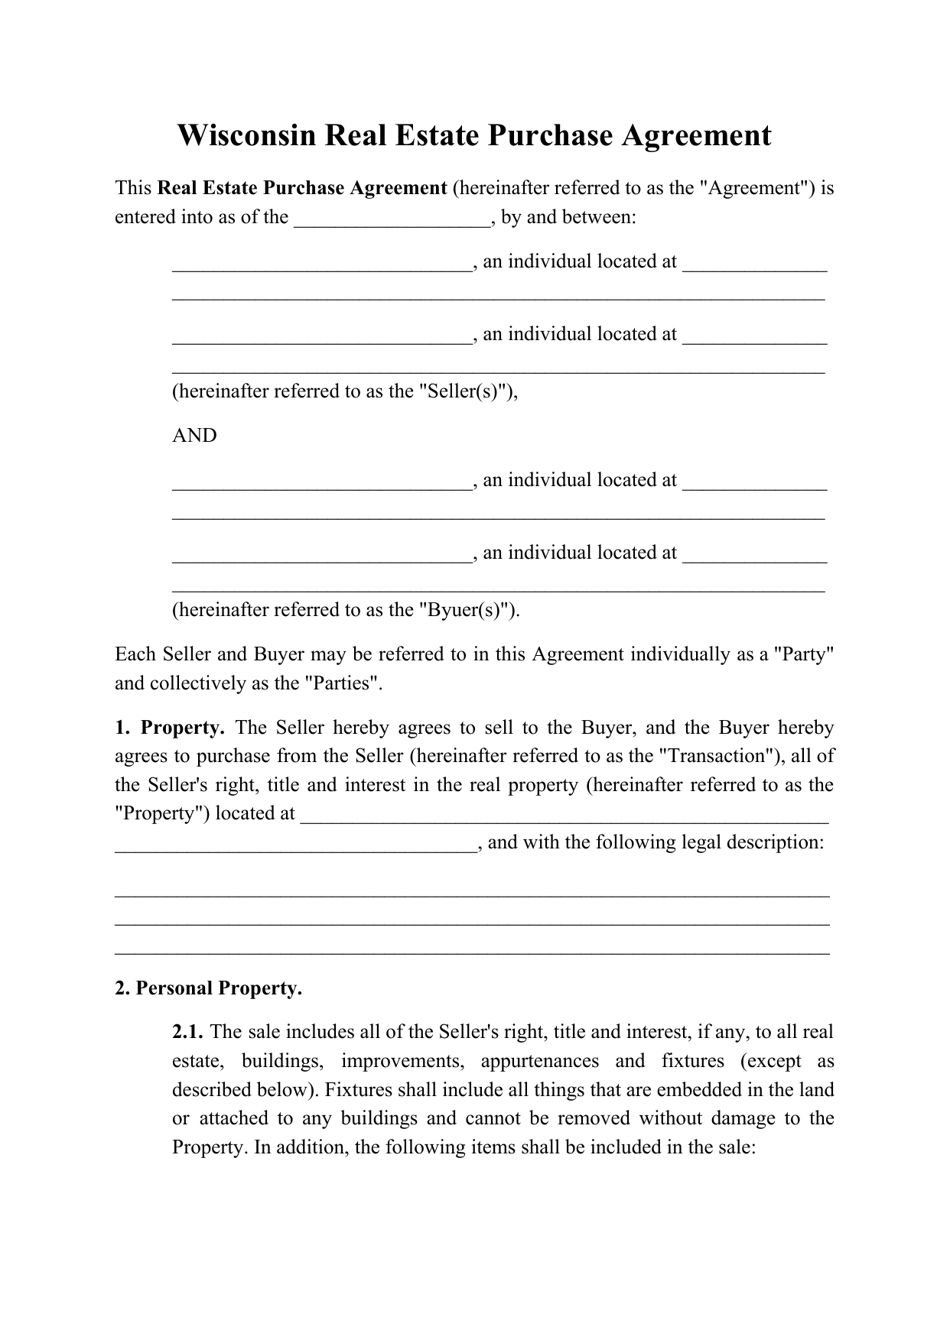 Real Estate Purchase Agreement Template - Wisconsin, Page 1